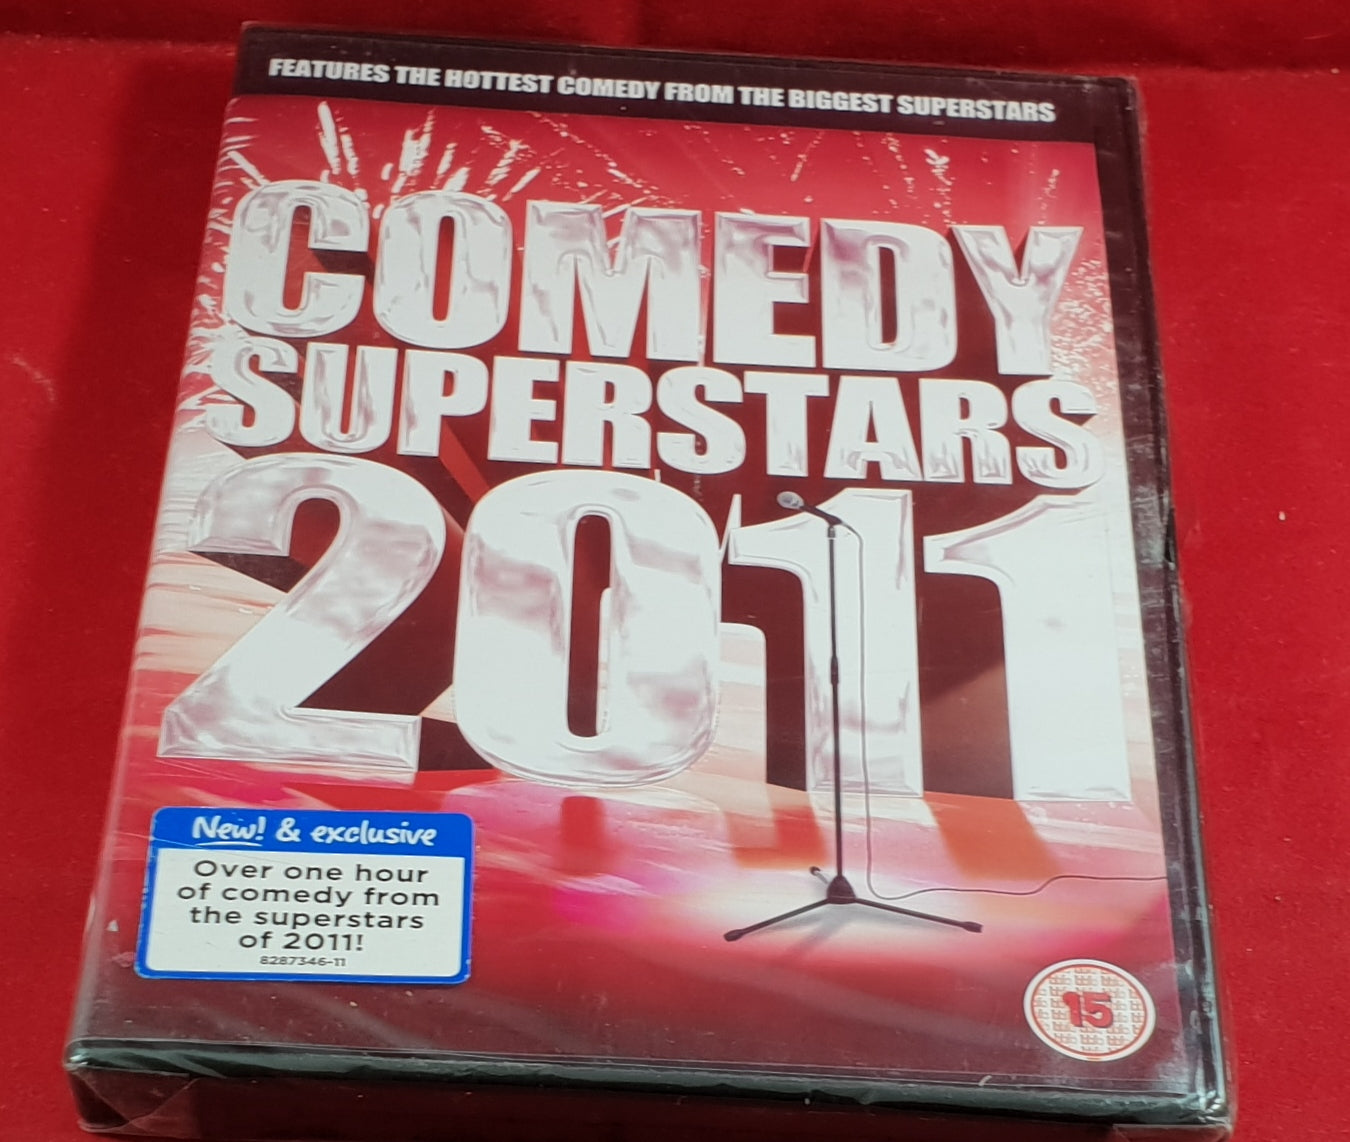 Brand New and Sealed Comedy Superstars 2011 DVD